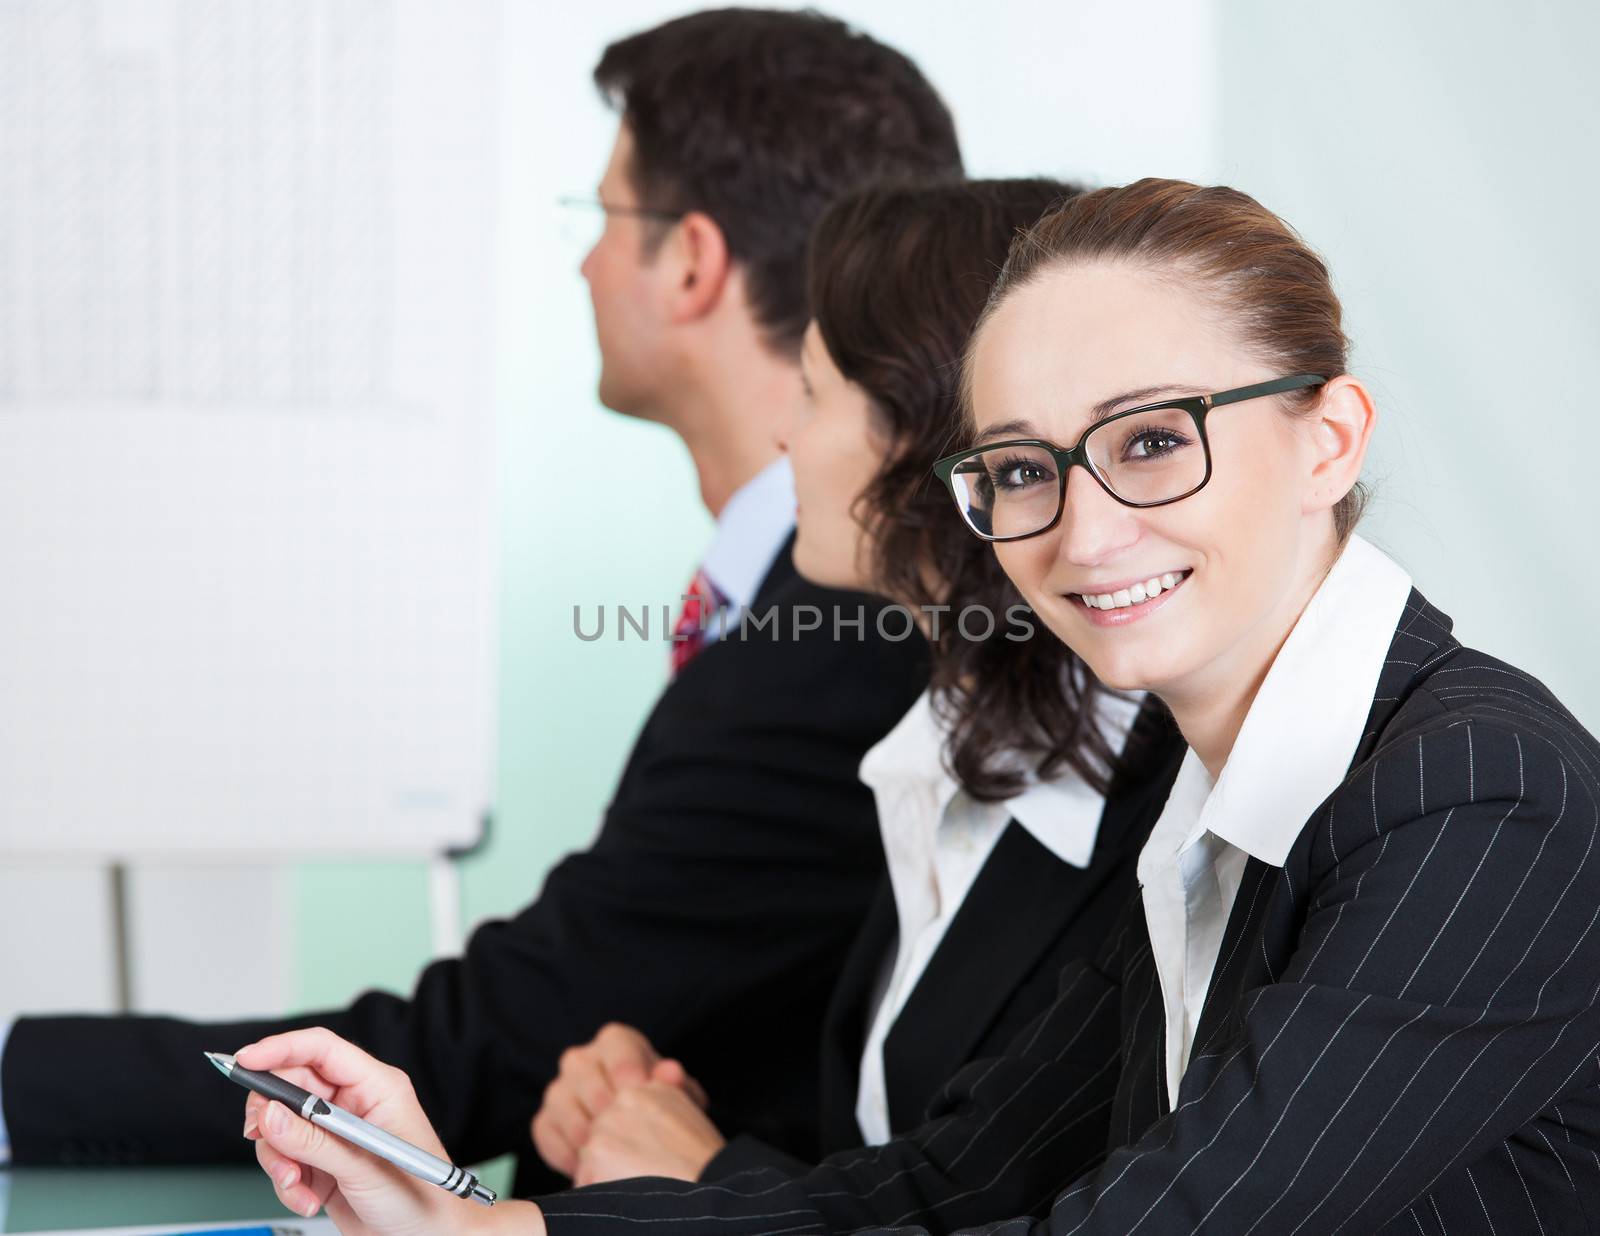 Smiling successful businesswoman wearing glasses looking at the camera while seated in a meeting with her colleagues